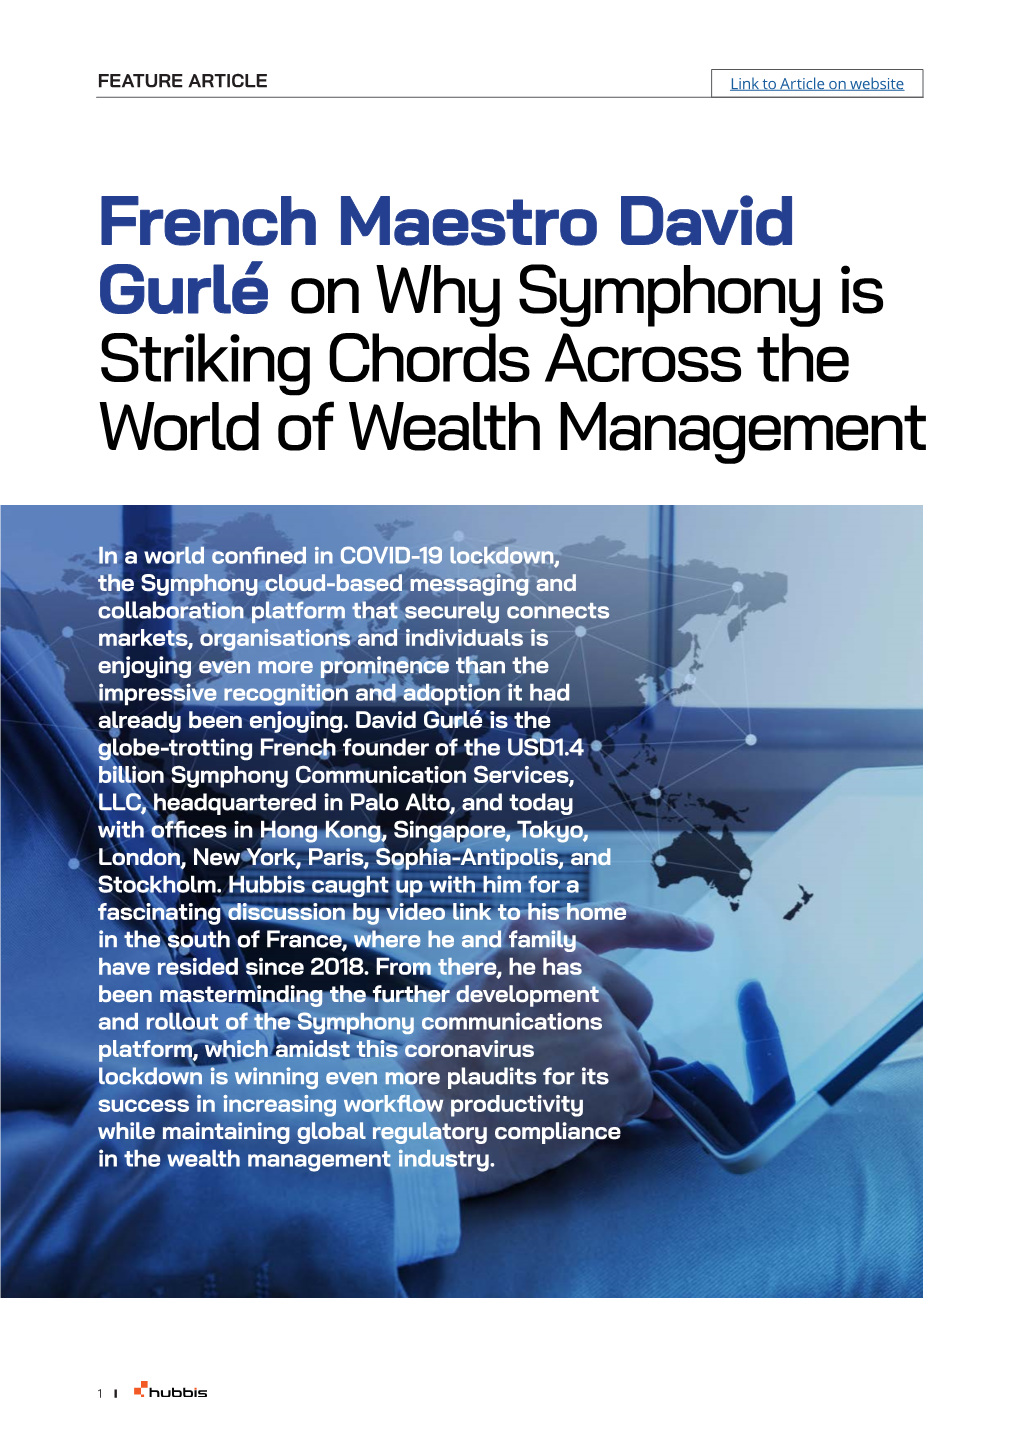 French Maestro David Gurlé on Why Symphony Is Striking Chords Across the World of Wealth Management